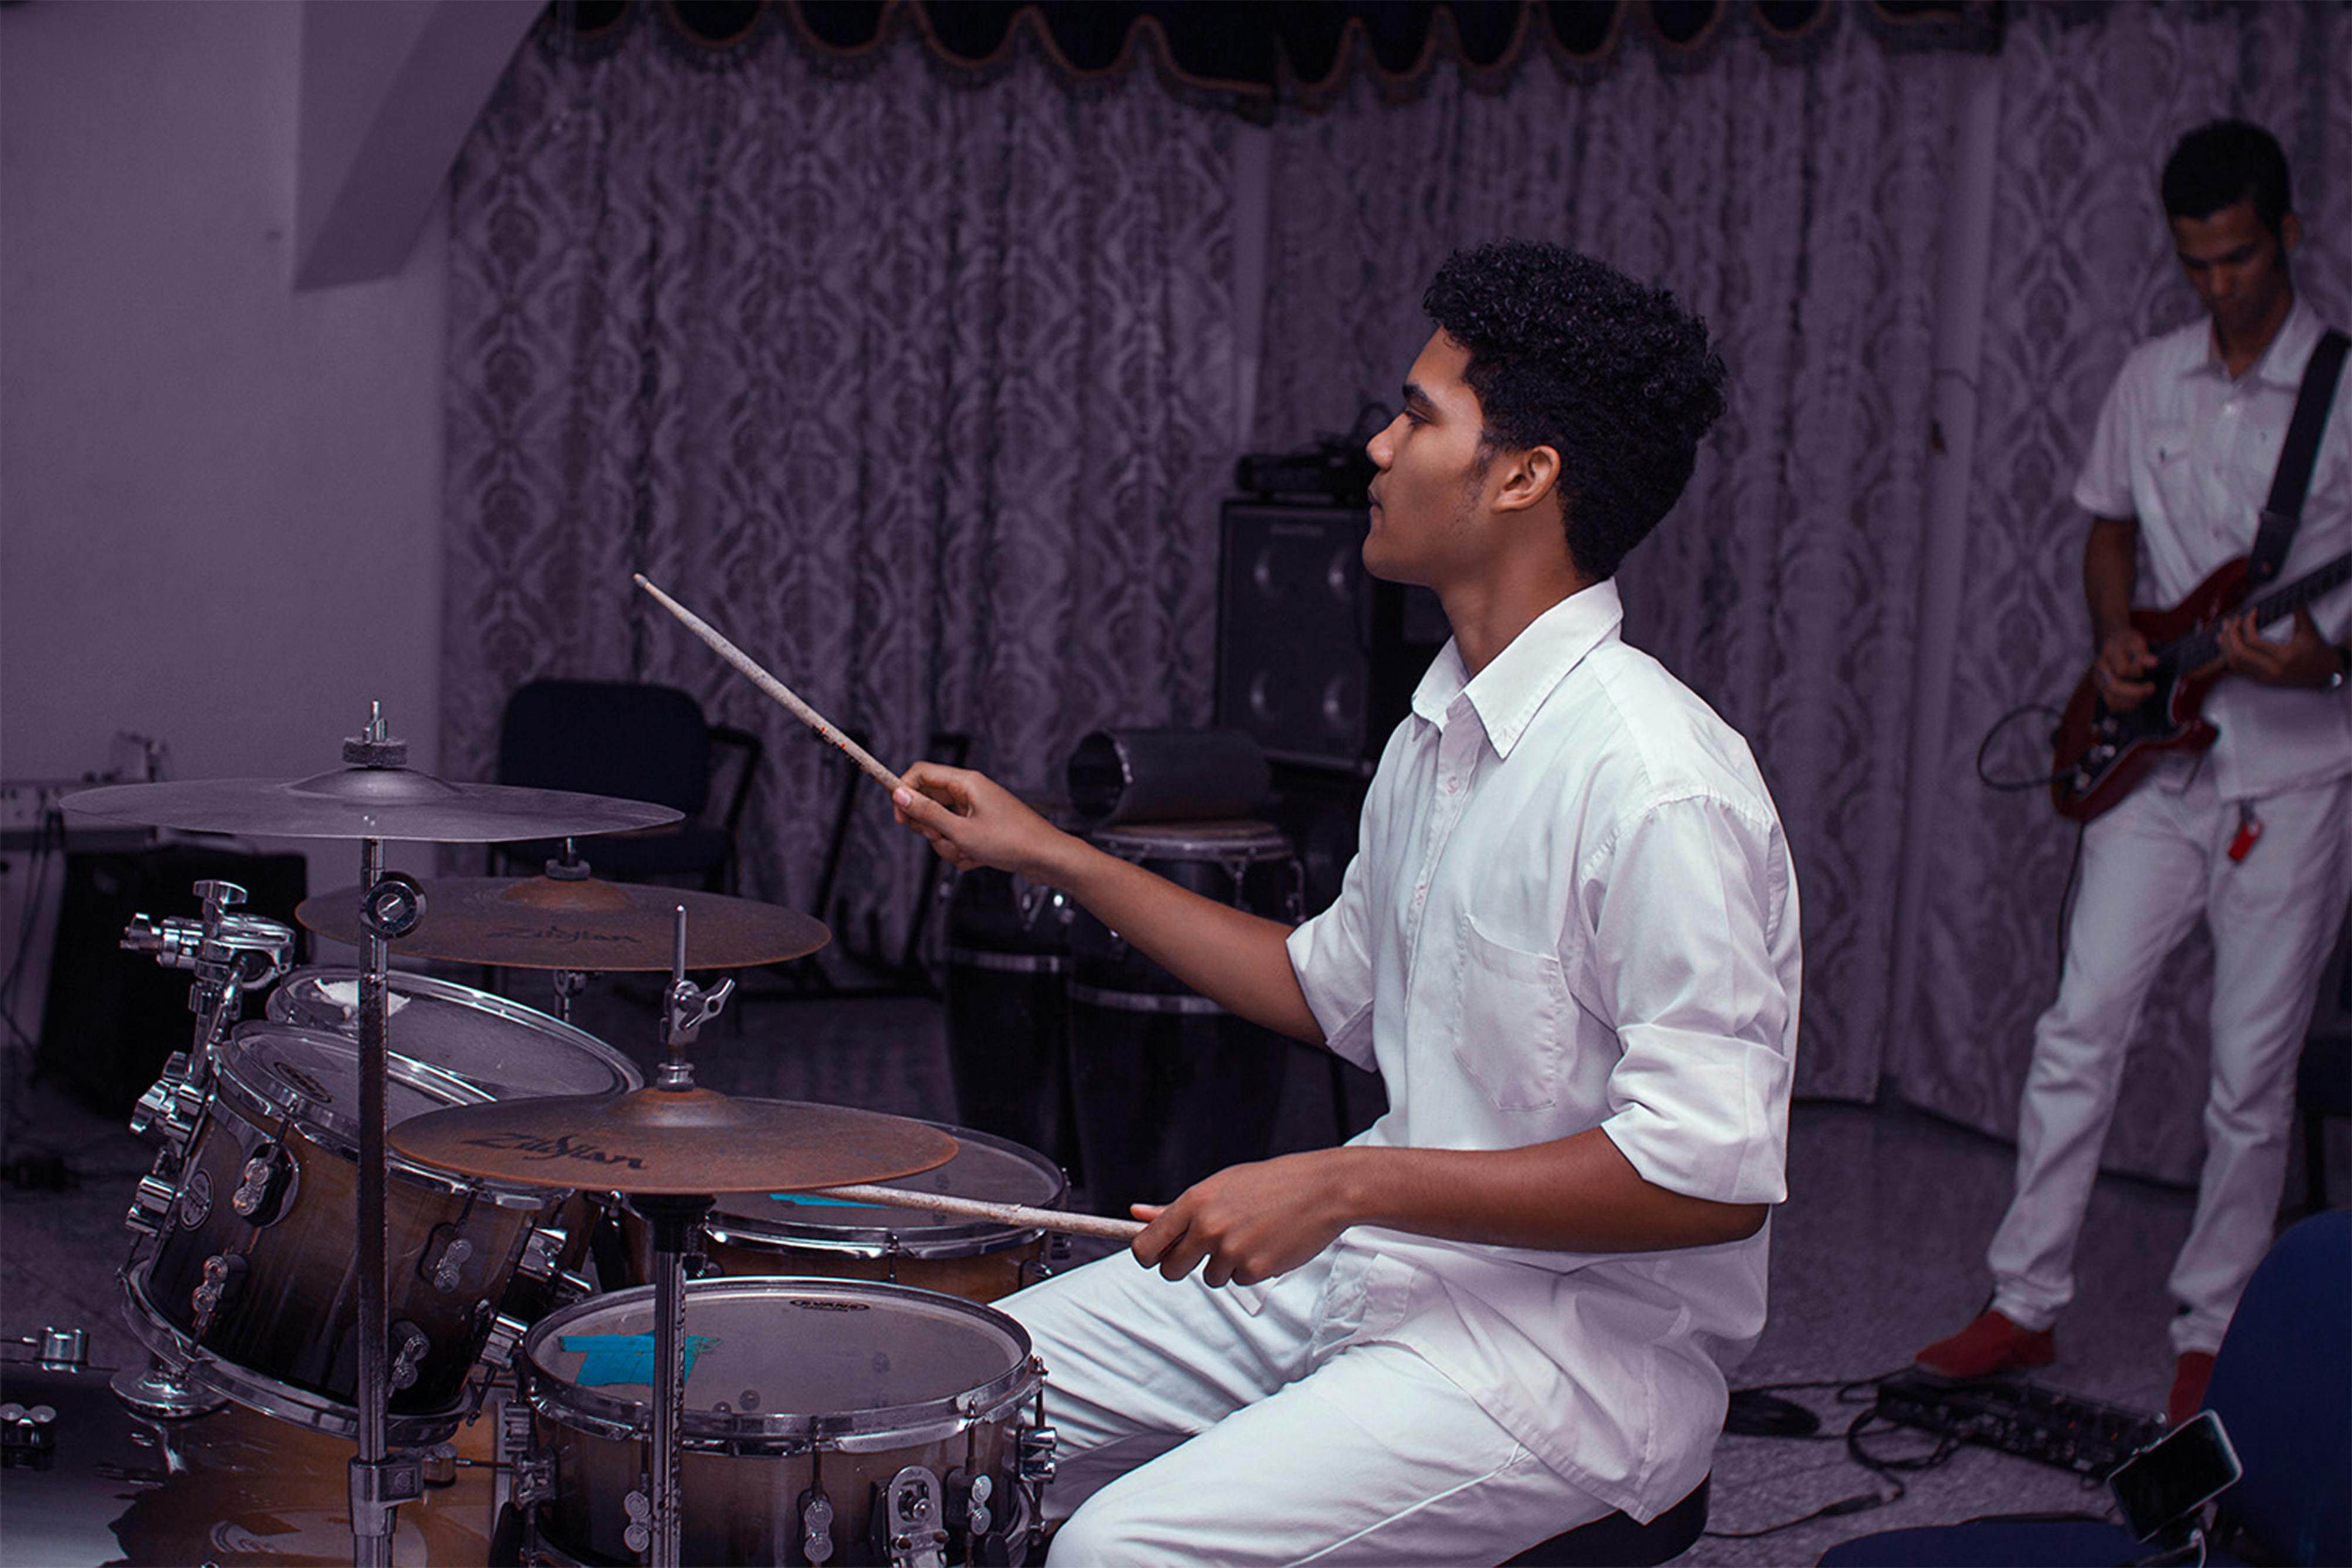 Free stock photo of Christian-Drummer/Drum/Kit/Drummer/Boy/Youth/Joven